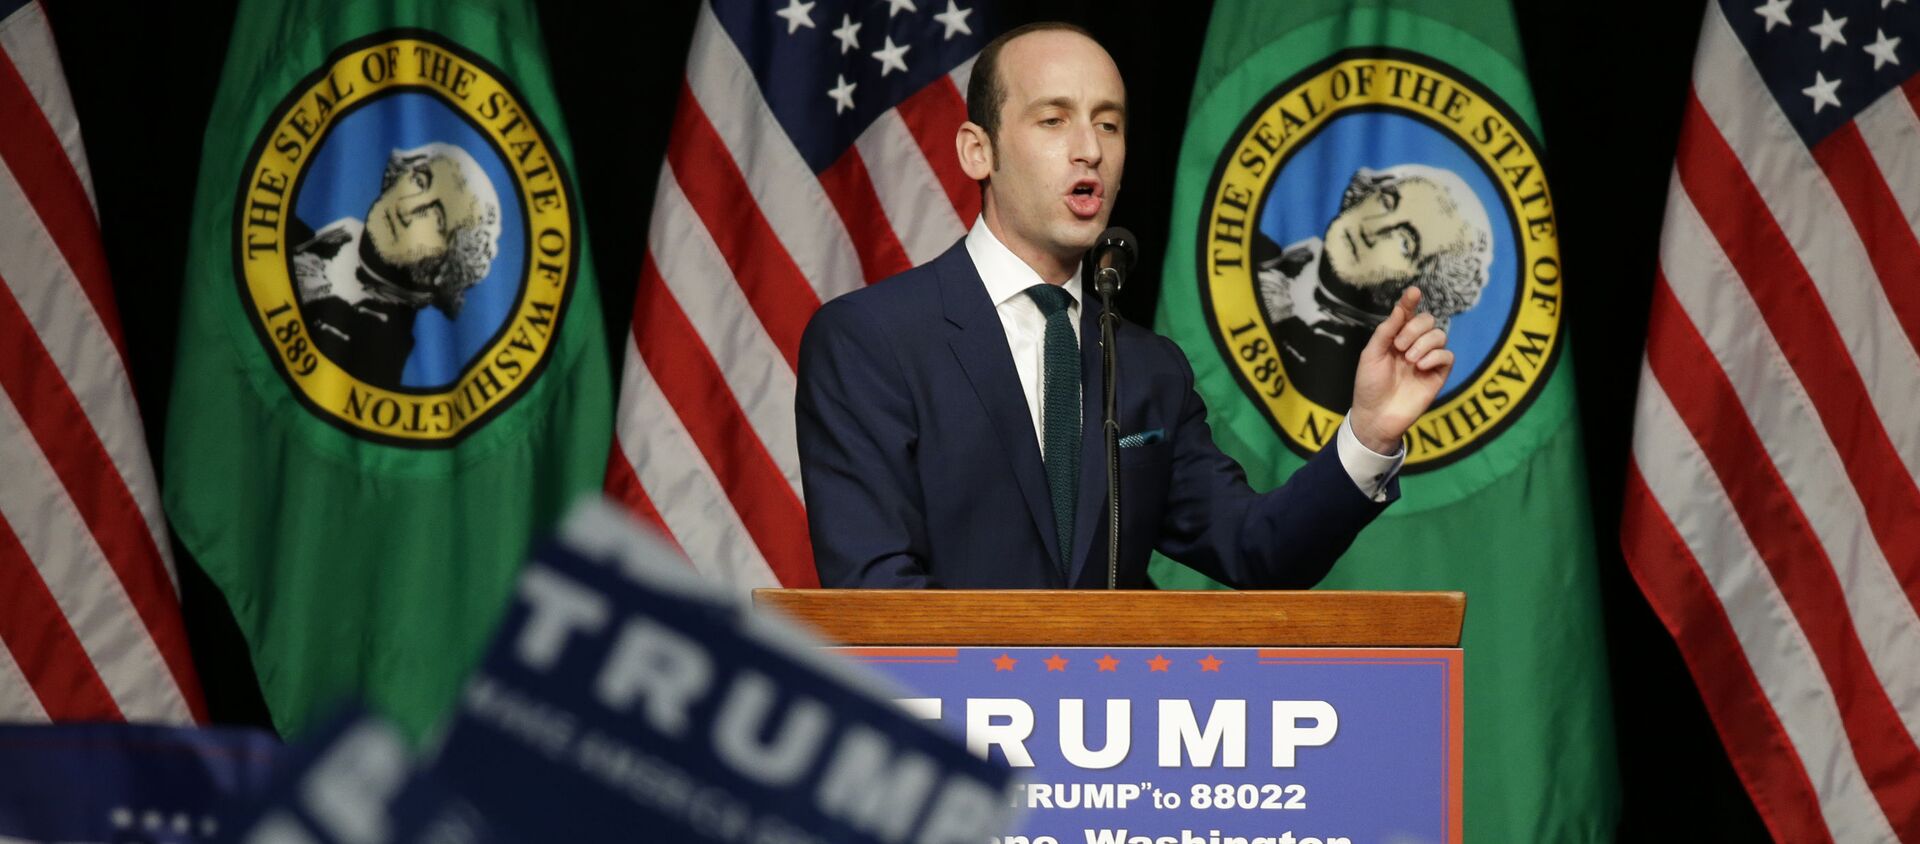 Stephen Miller, a policy advisor to Republican presidential candidate Donald Trump, speaks during a rally in Spokane, Wash., Saturday, May 7, 2016.  - Sputnik International, 1920, 07.04.2021